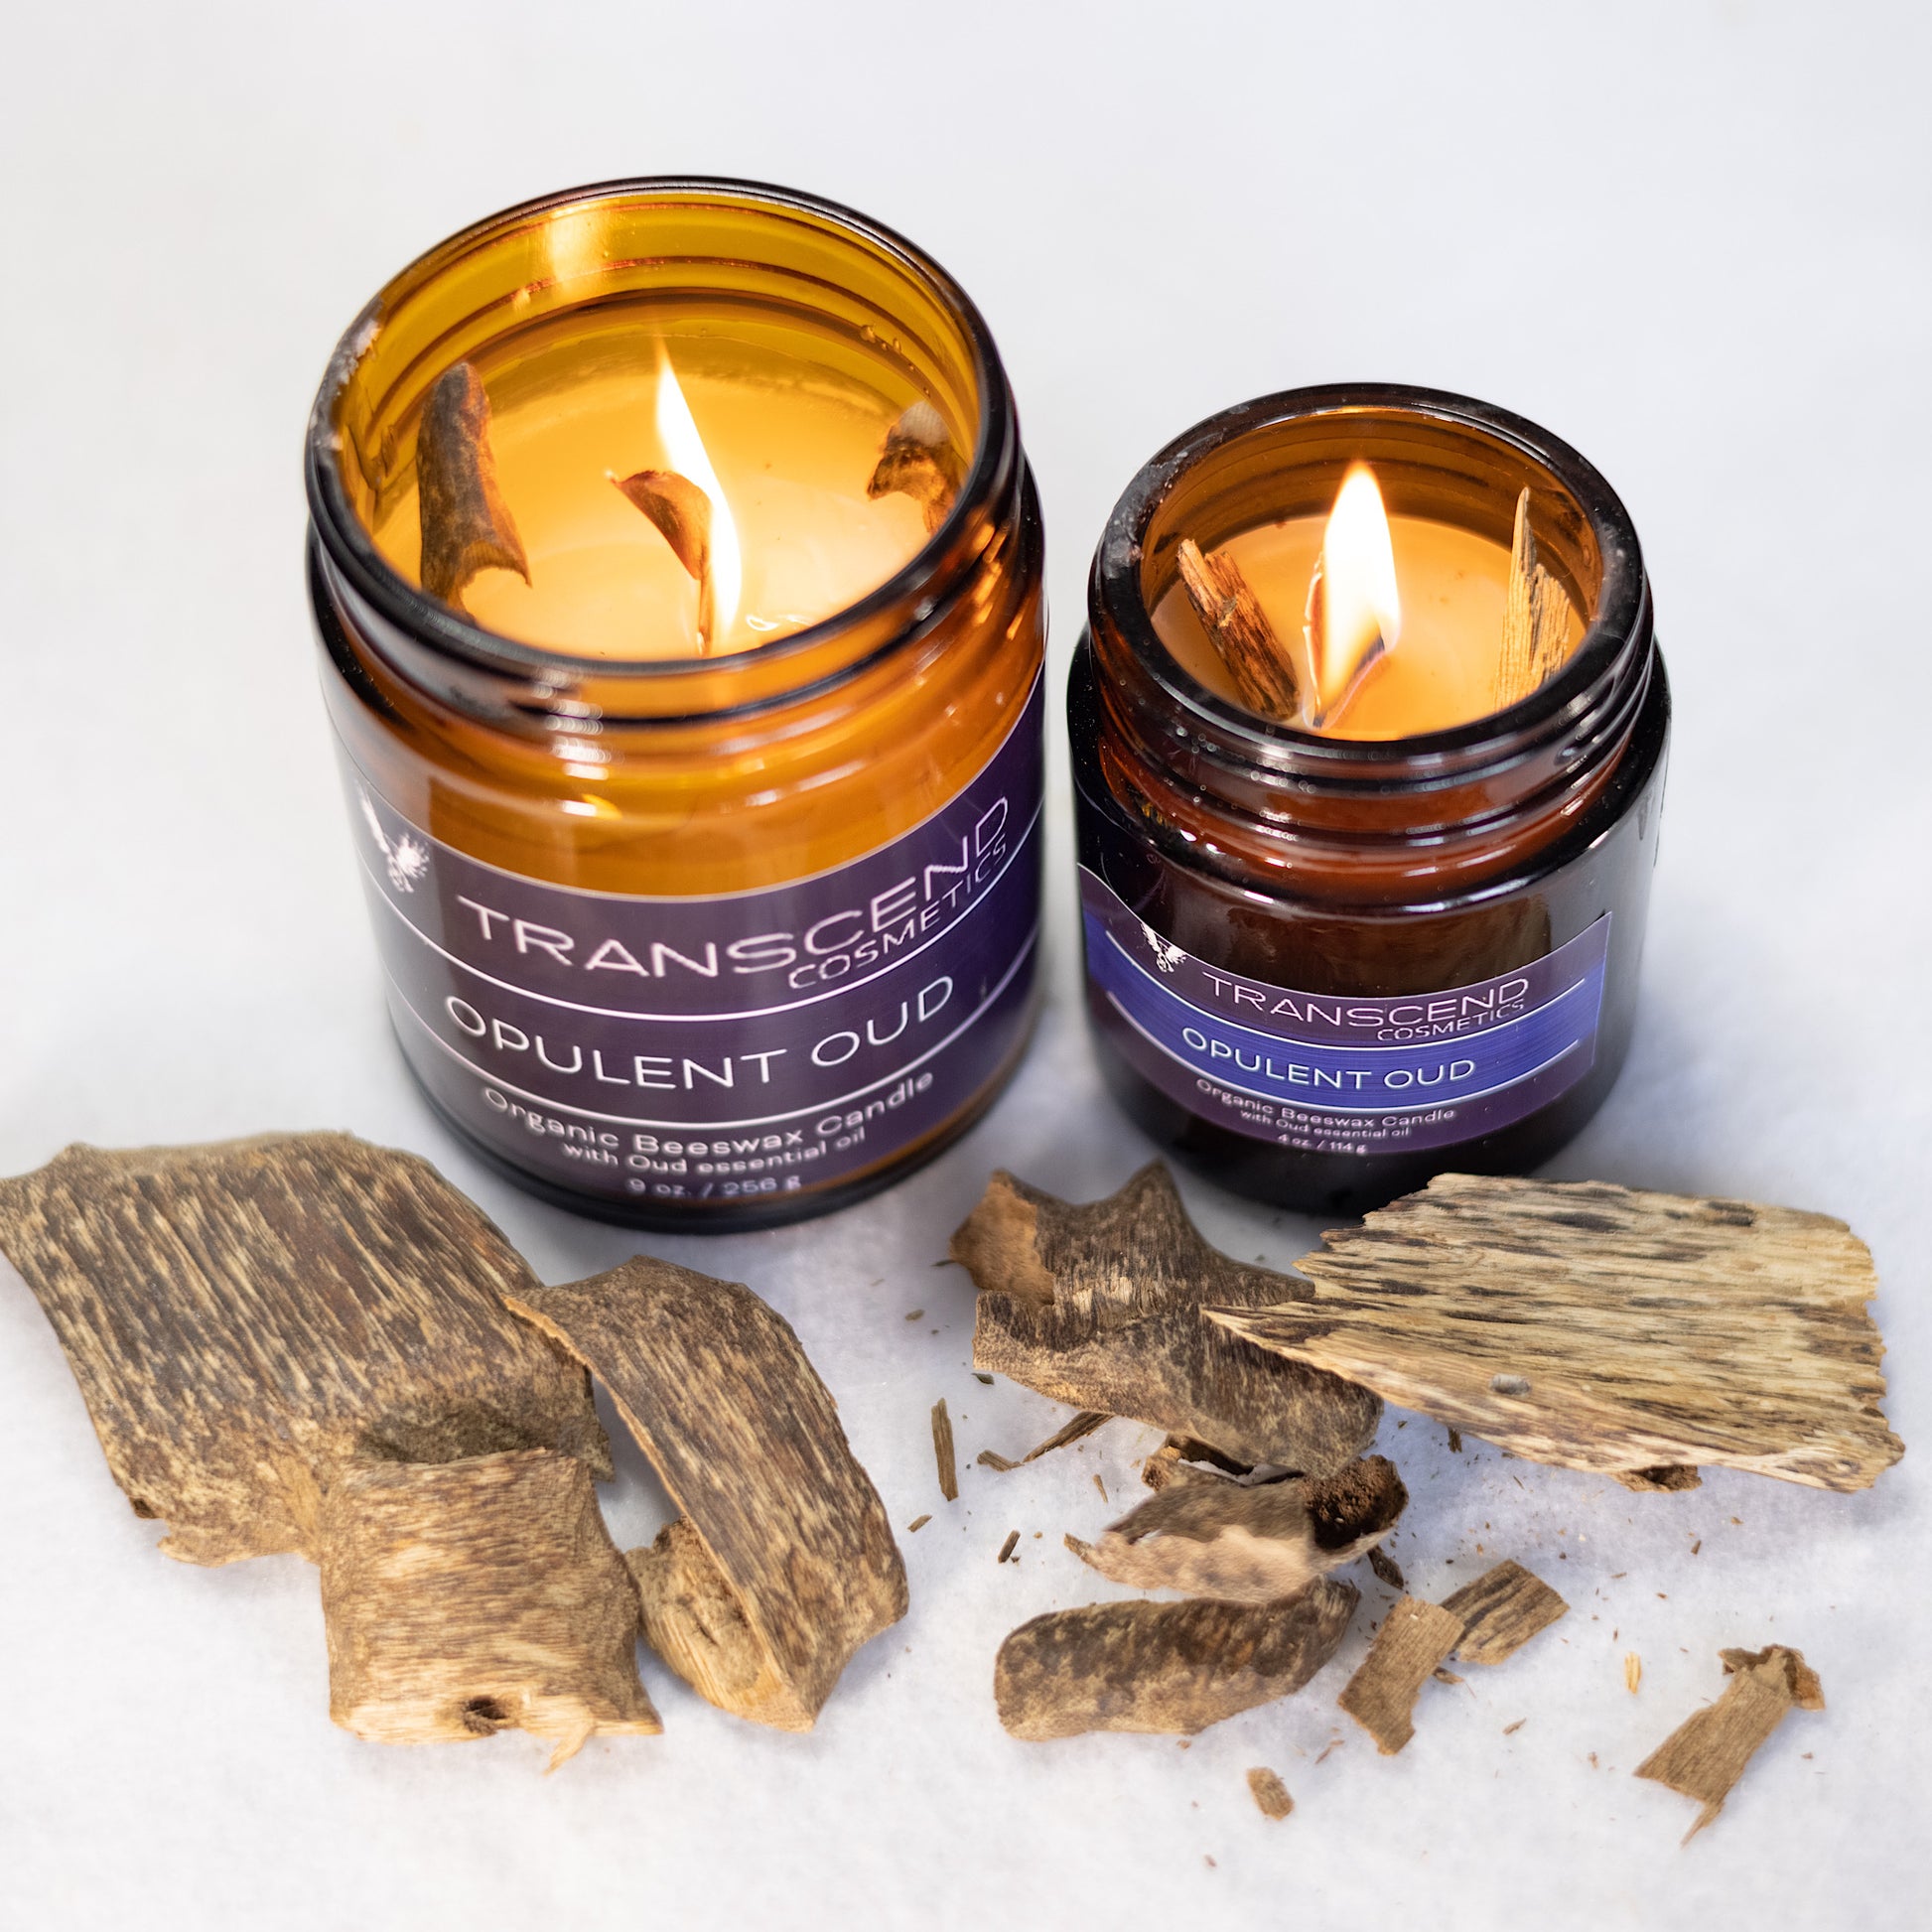 organic candle, transcend cosmetics candle, transcend cosmetics, transcend cosmetics beeswax candle,essential oil, essential oil candle, candle, beeswax candle, opulent oud, opulent oud candle, oud candle, opulent oud transcend cosmetics, transcend cosmetics oud candle, transcend cosmetics opulent oud, 